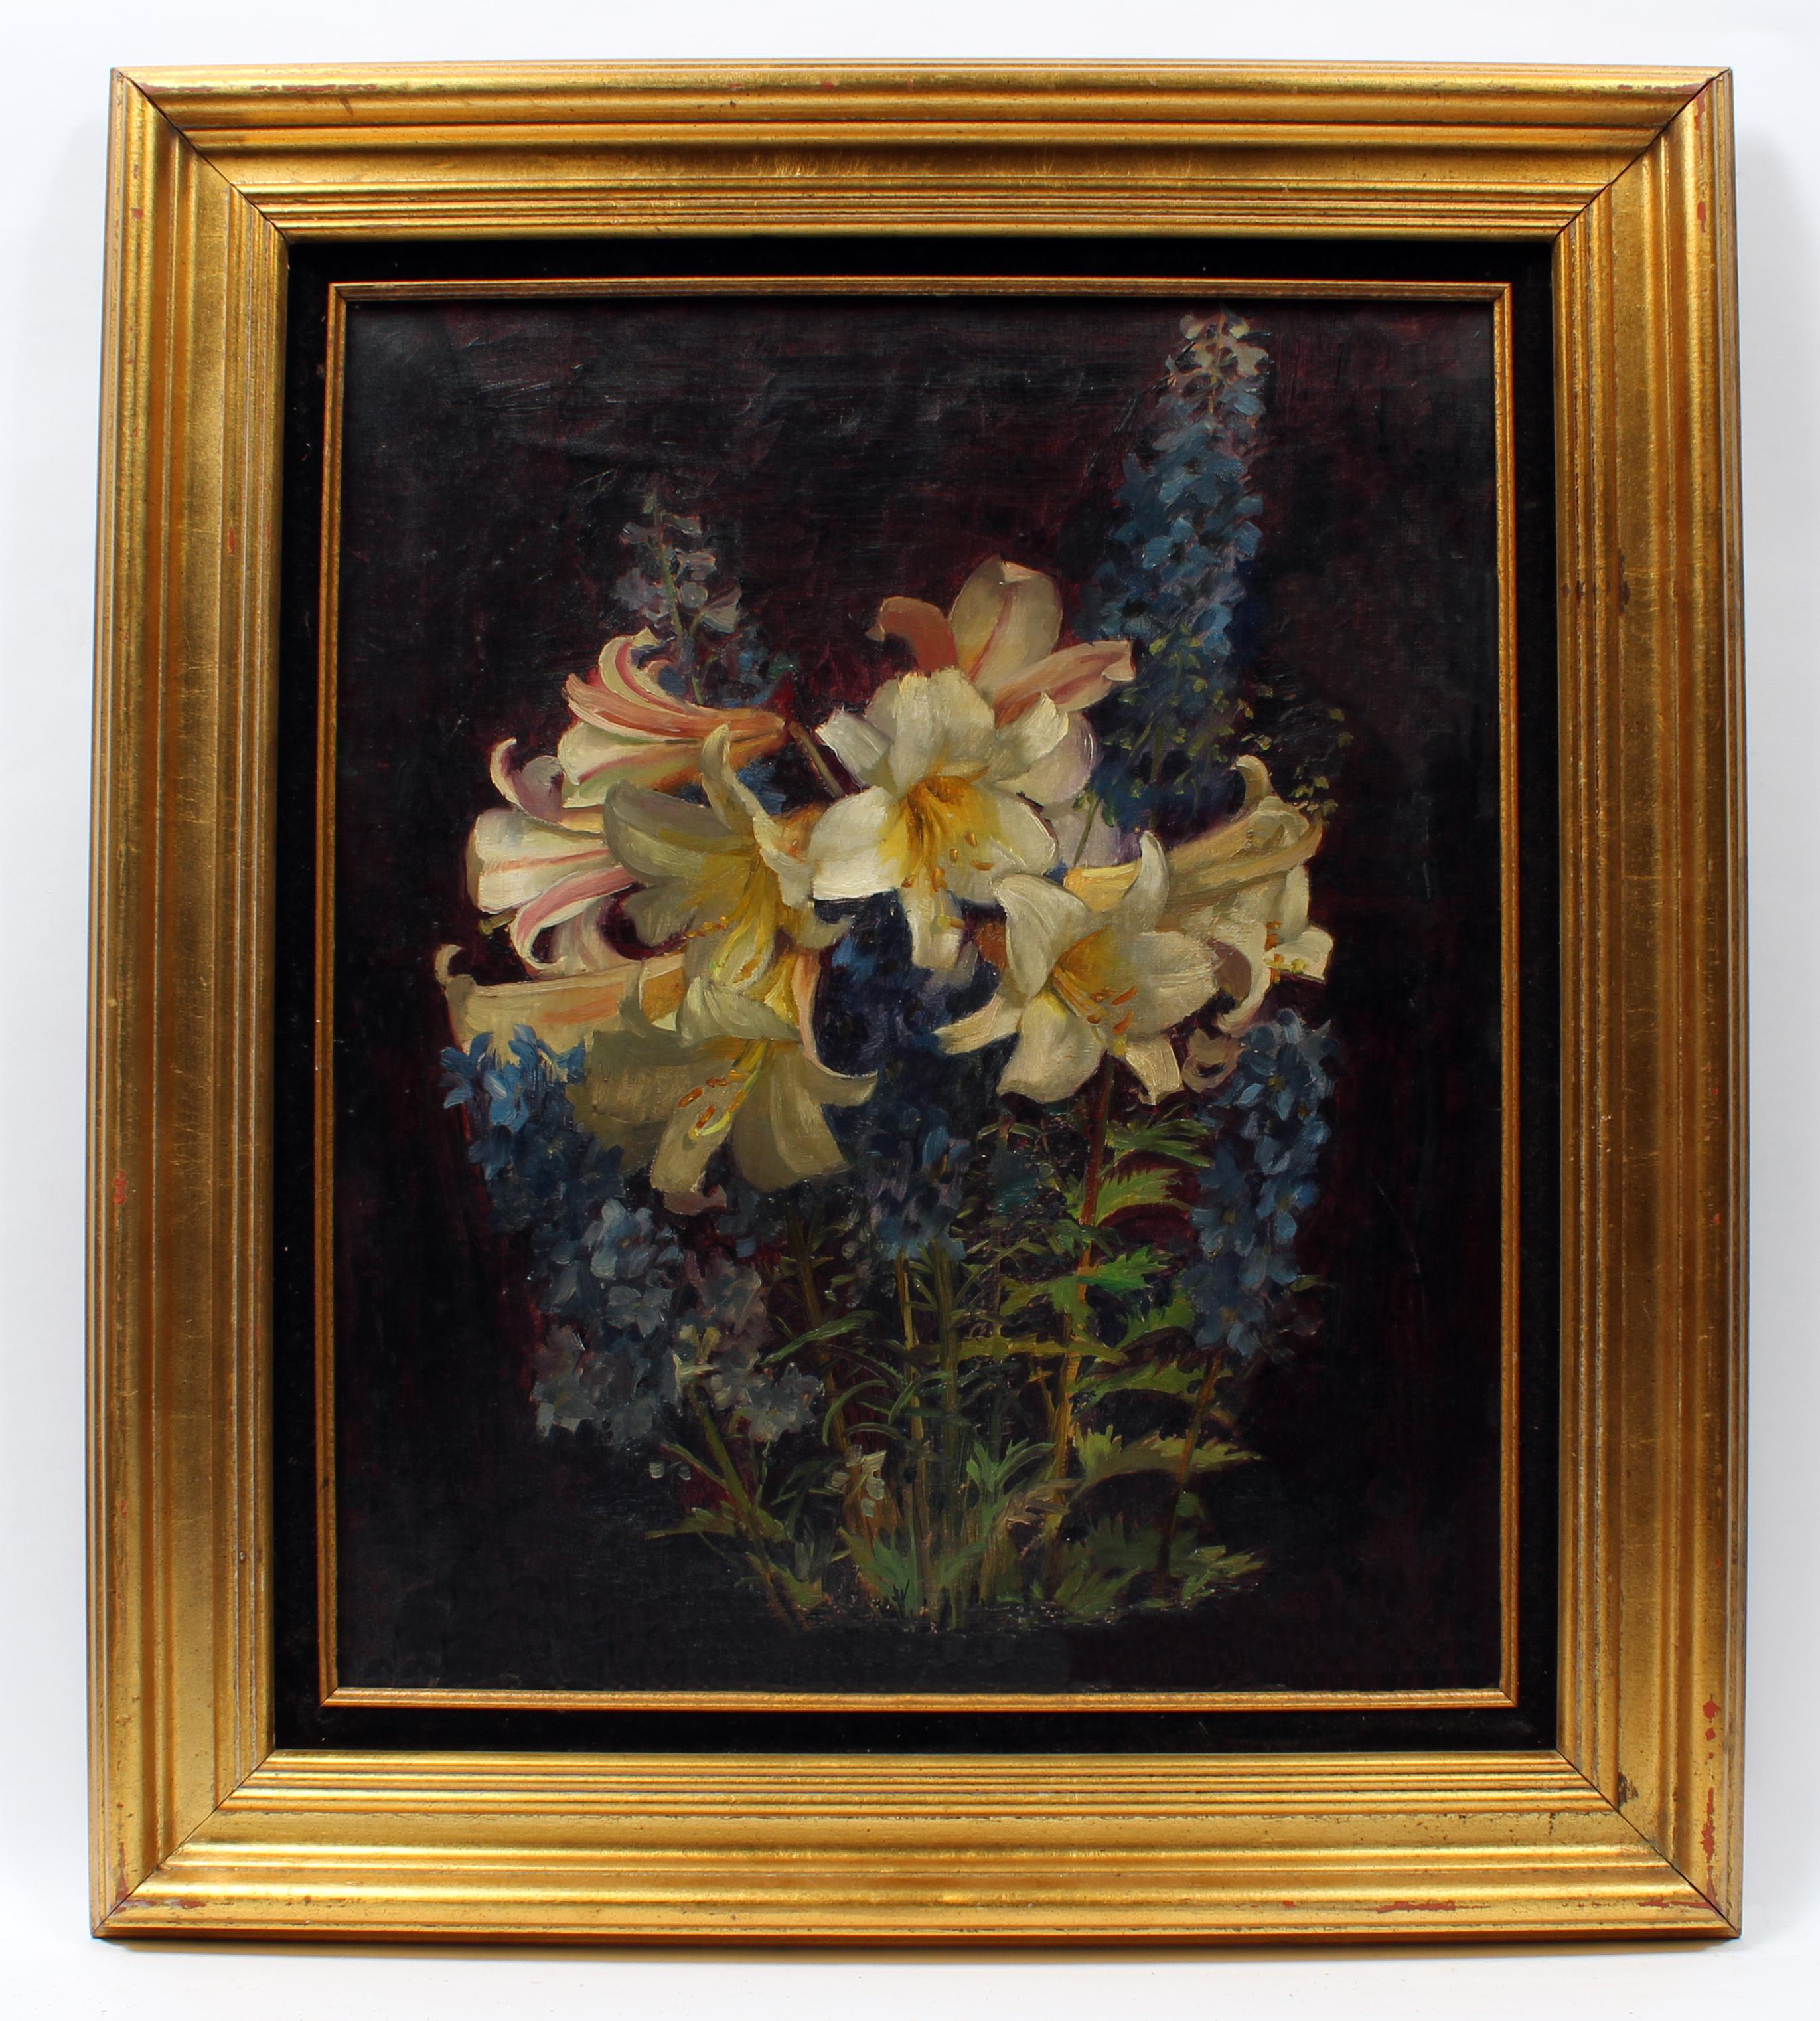 An original antique still life painting by listed American/Scottish female artist Nan Watson.

This stunning painting comes beautifully framed and the presentation shines on the wall.